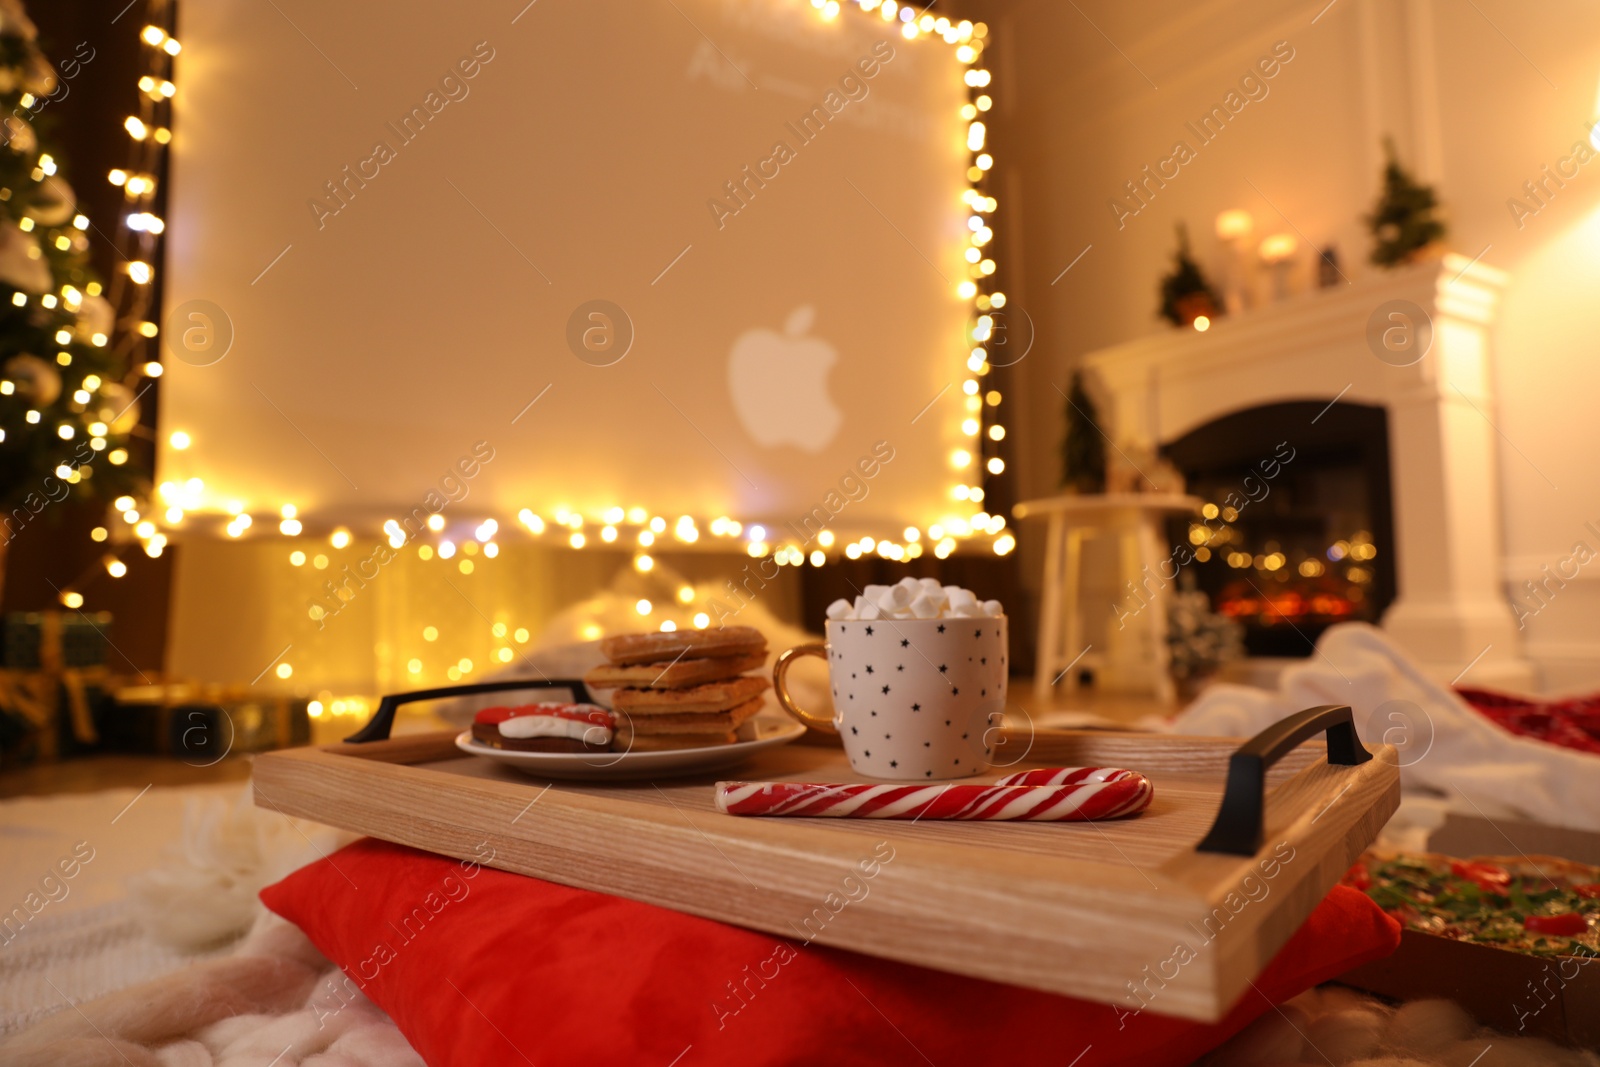 Photo of MYKOLAIV, UKRAINE - DECEMBER 24, 2020: Video projector screen displaying Apple company logo in room, focus on tray with snack and drink